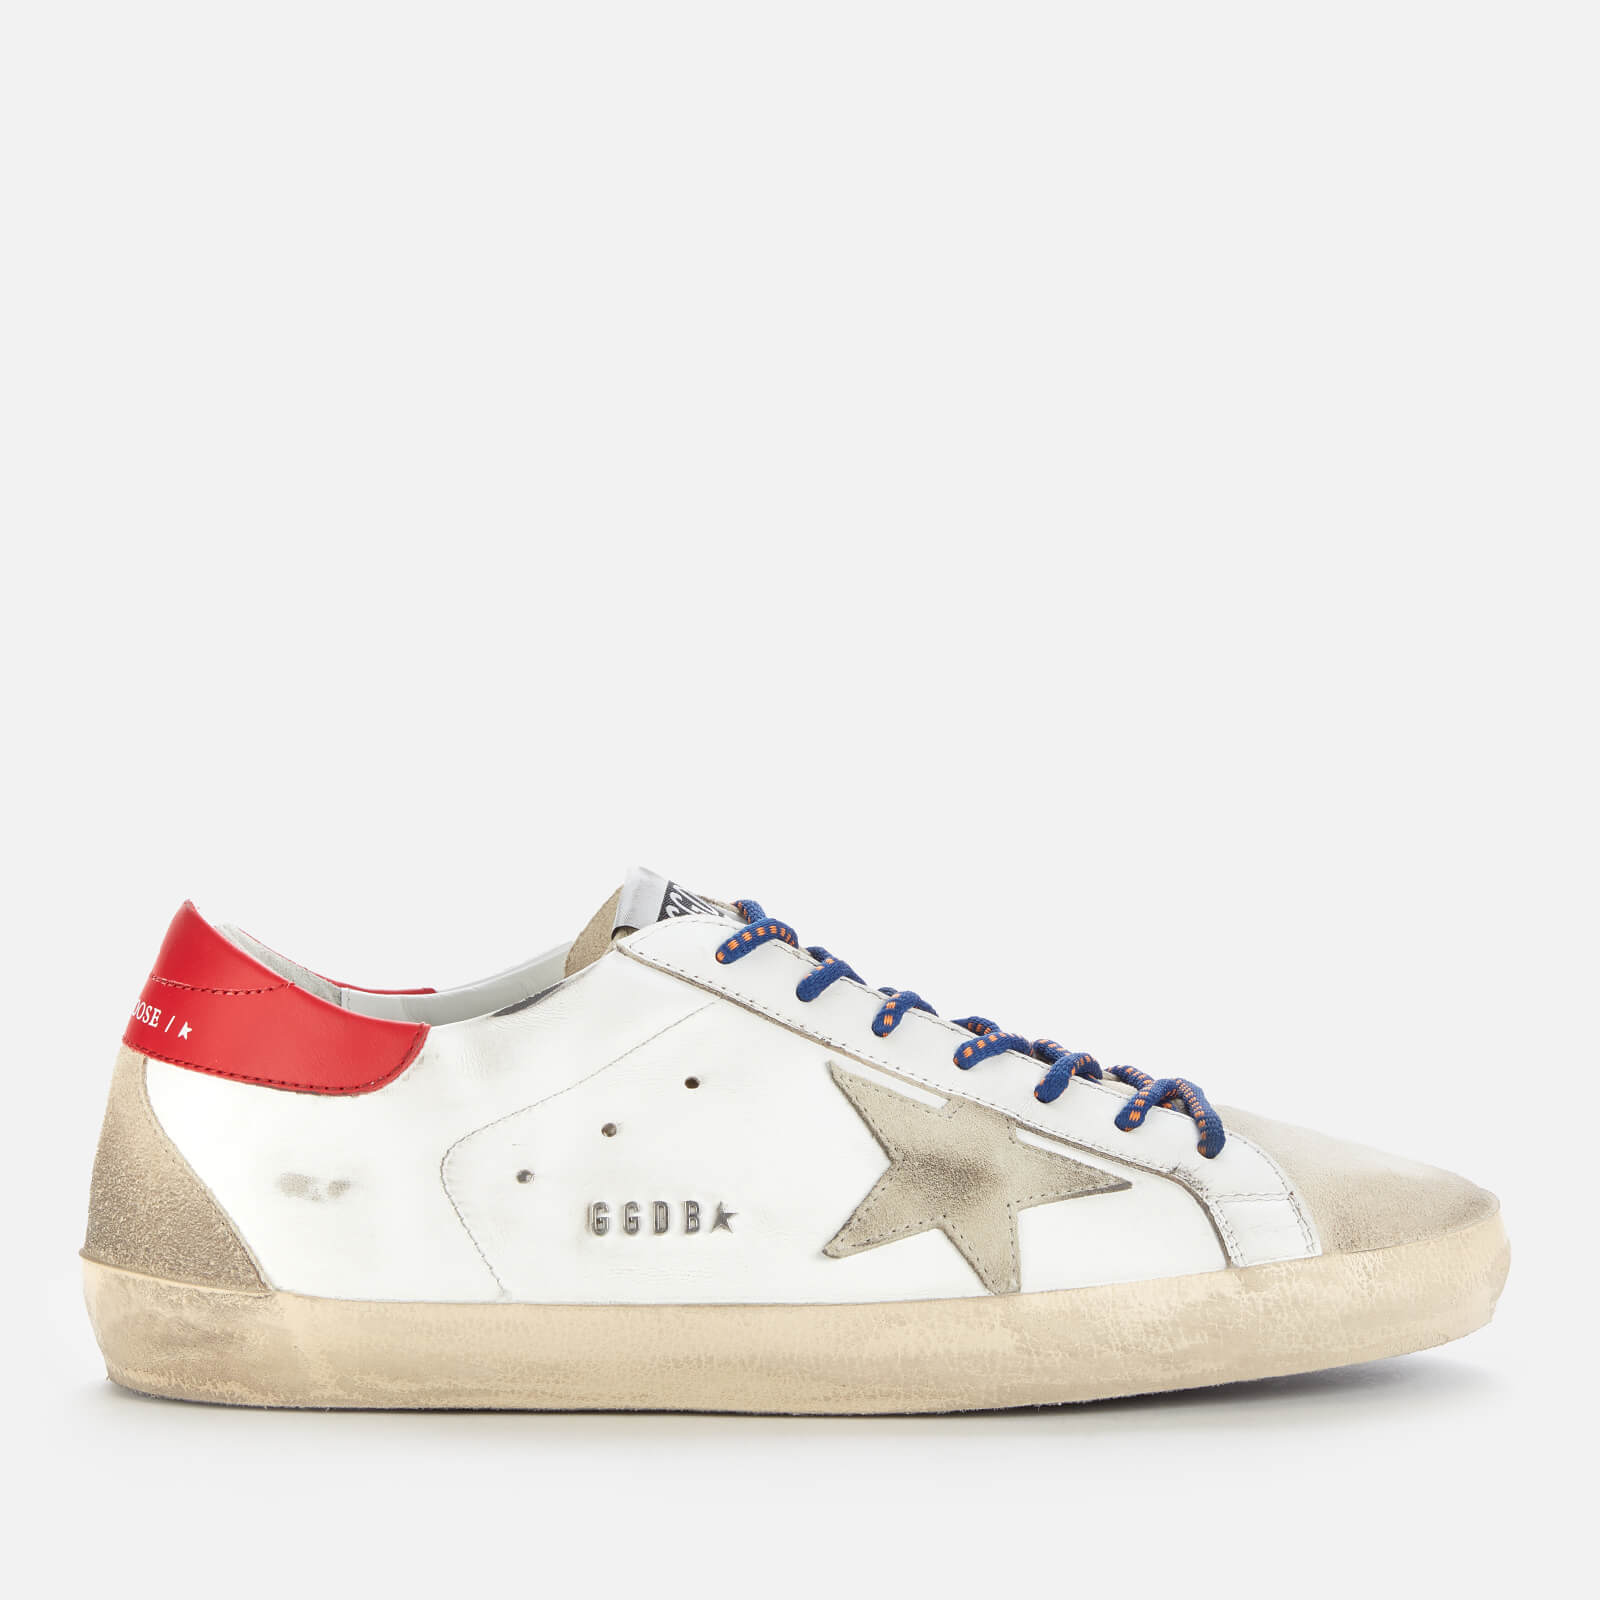 Golden Goose Deluxe Brand Men's Superstar Leather Trainers - Ice/White/Seedpearl/Red - UK 9